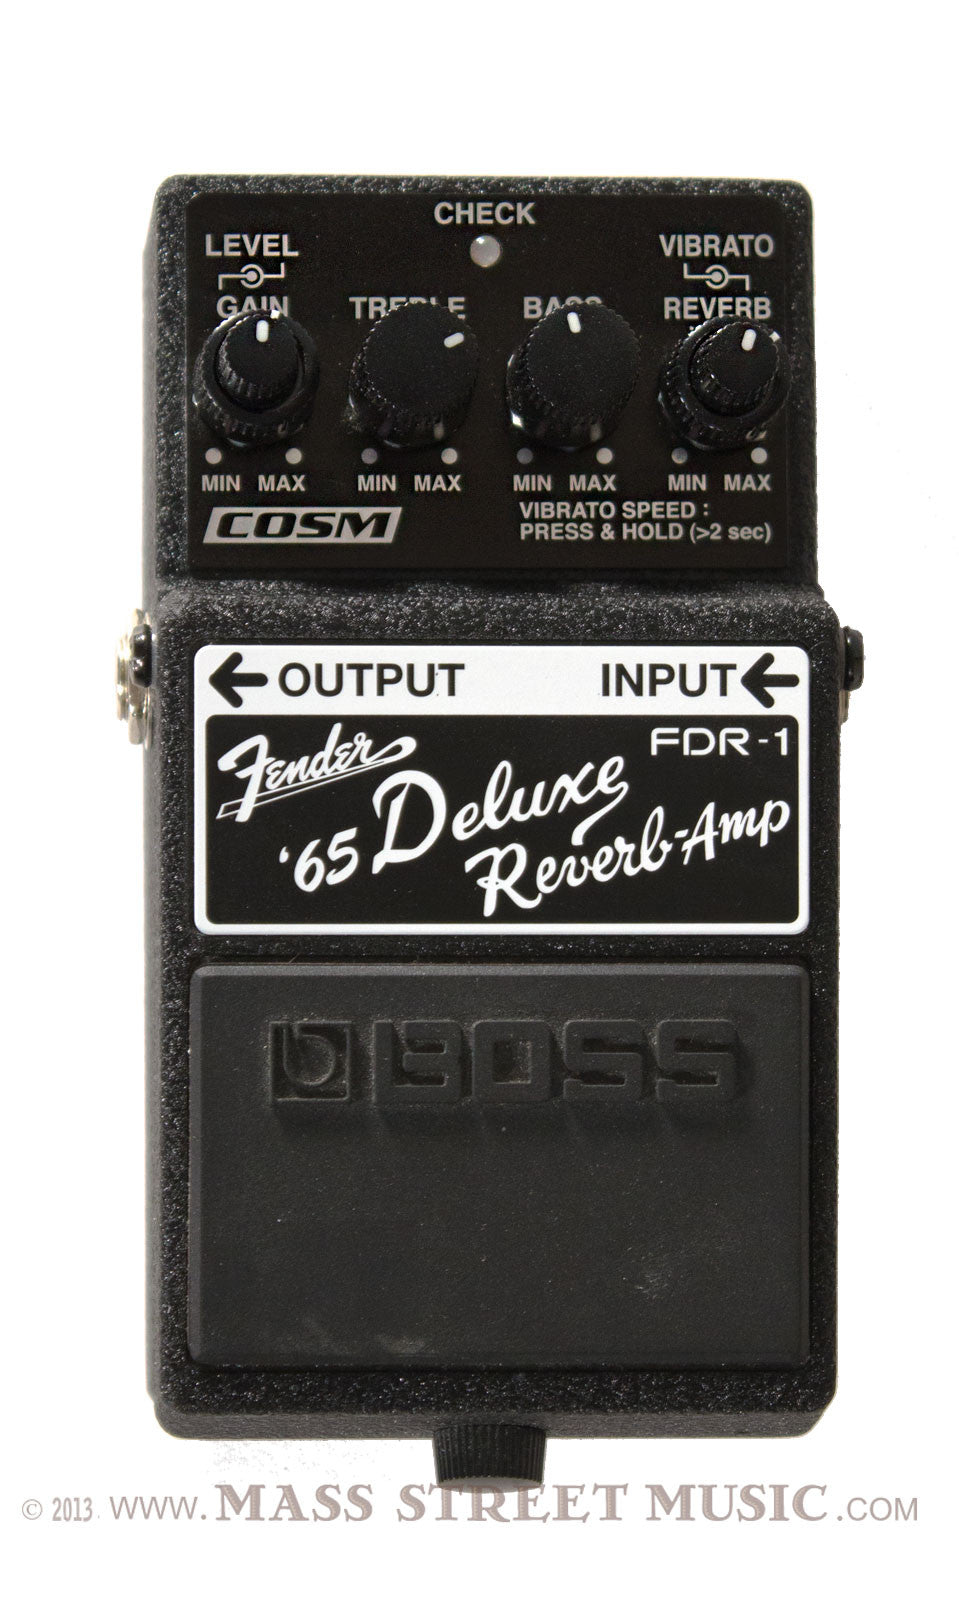 BOSS Effect Pedals - Fender '65 Deluxe Reverb